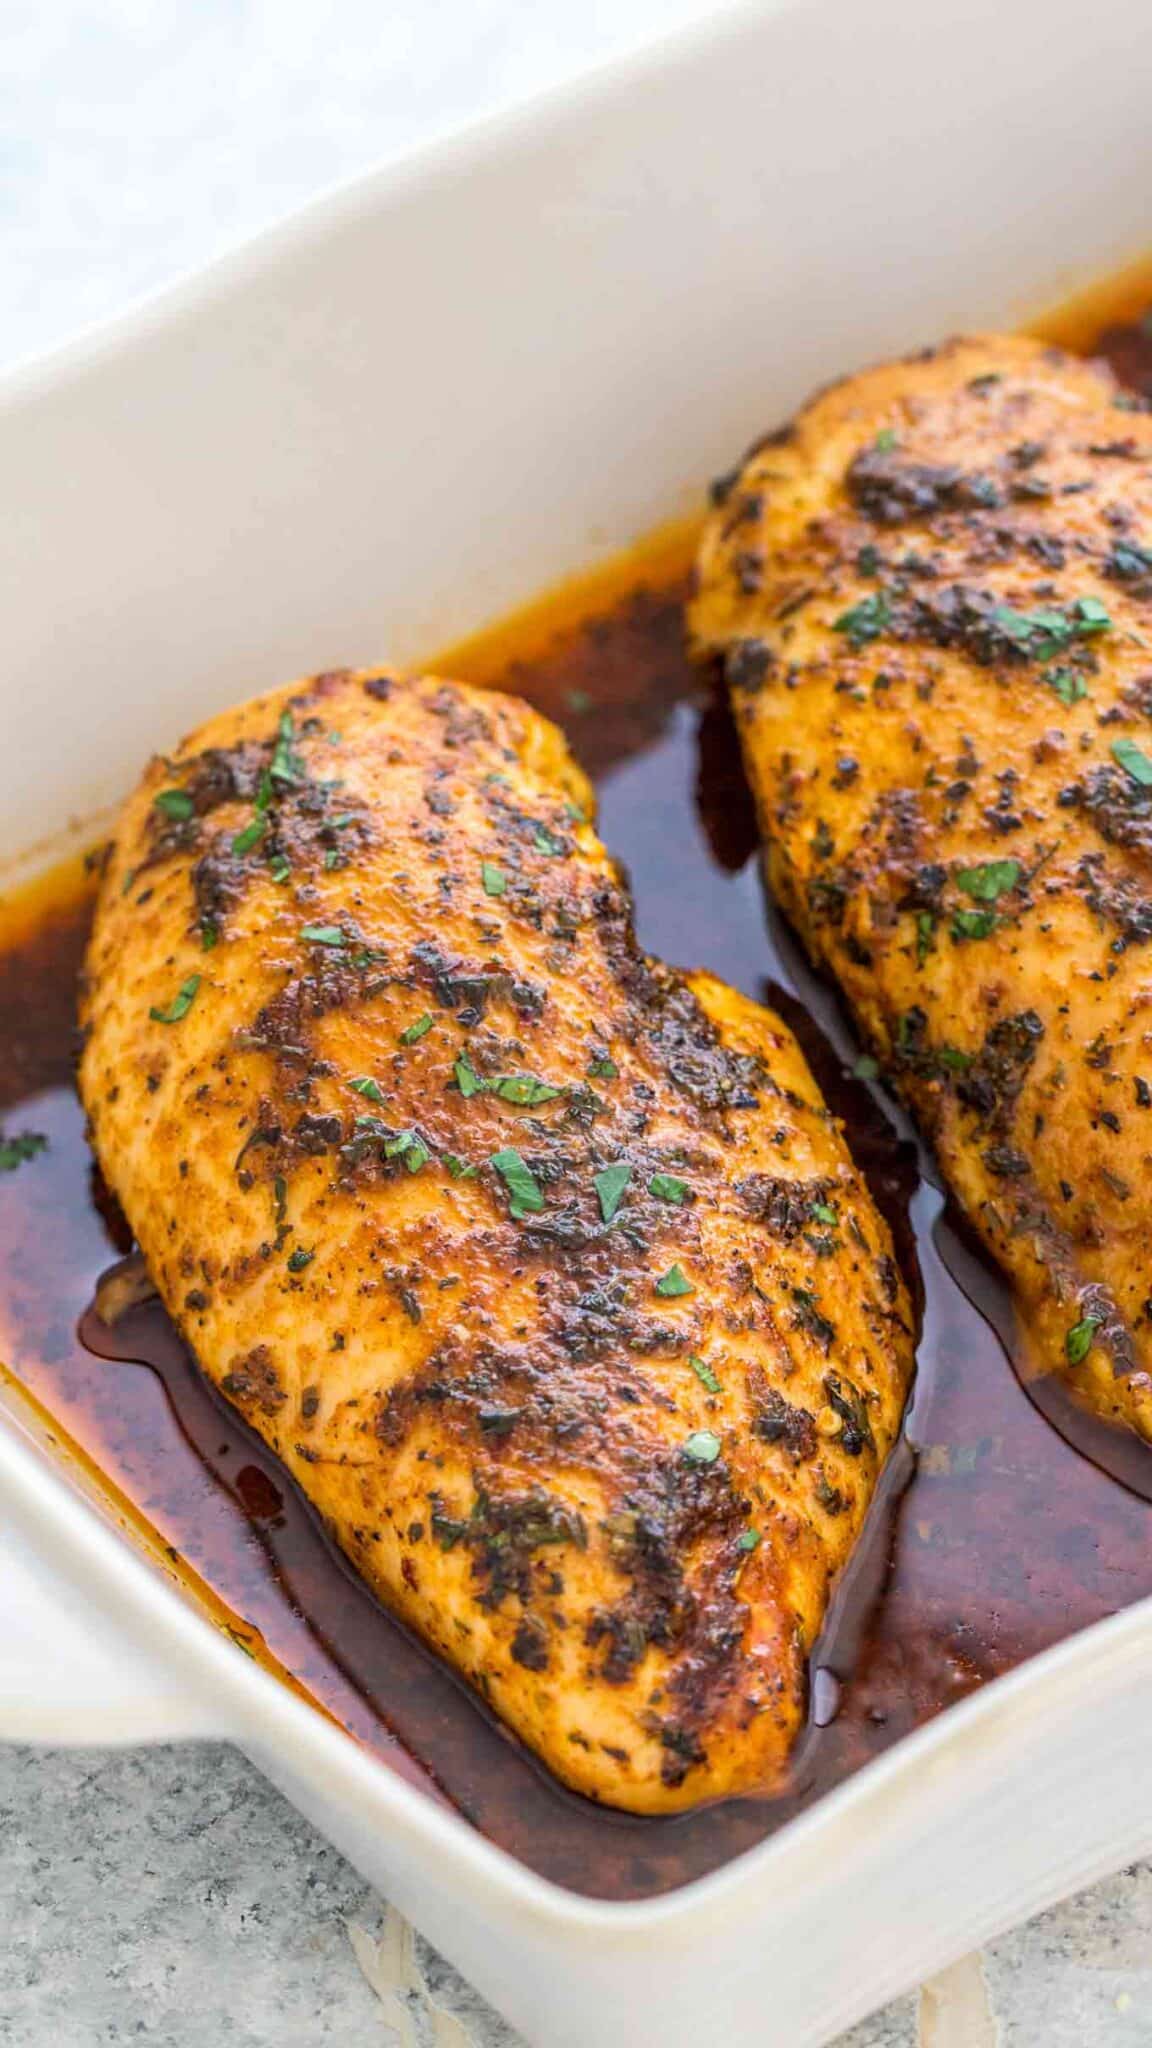 https://sweetandsavorymeals.com/wp-content/uploads/2019/01/Oven-Baked-Chicken-Breasts-3-scaled.jpg